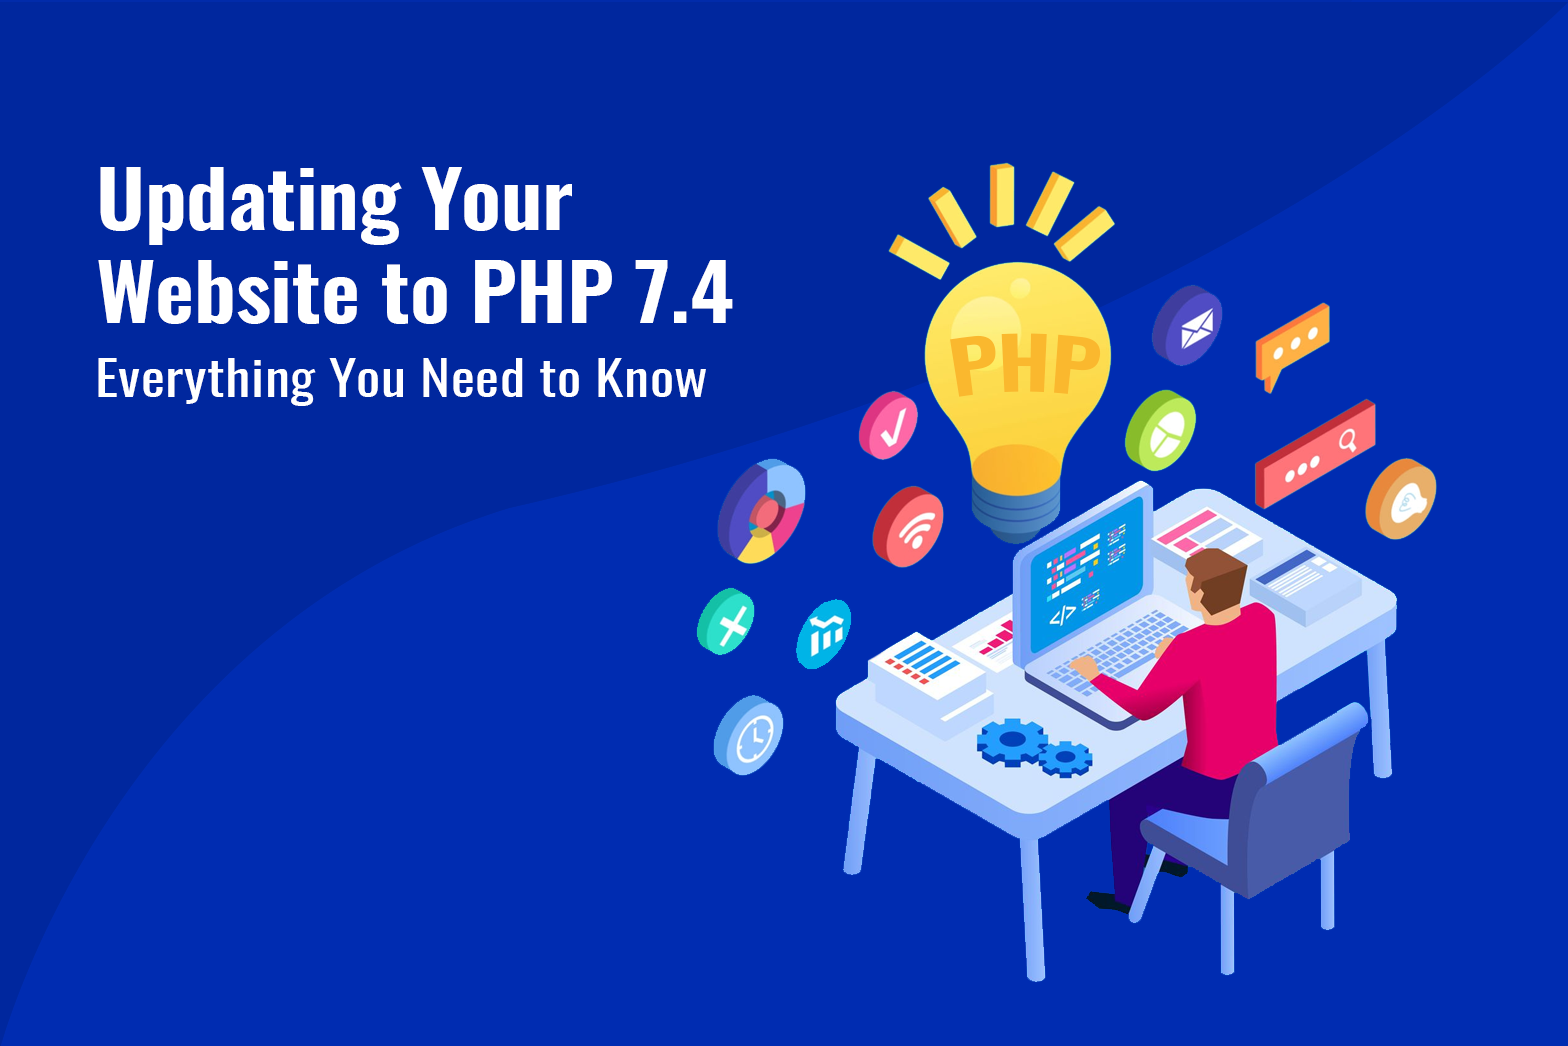 Everything You Need to Know to Prepare Your Website Ready for PHP 7.4